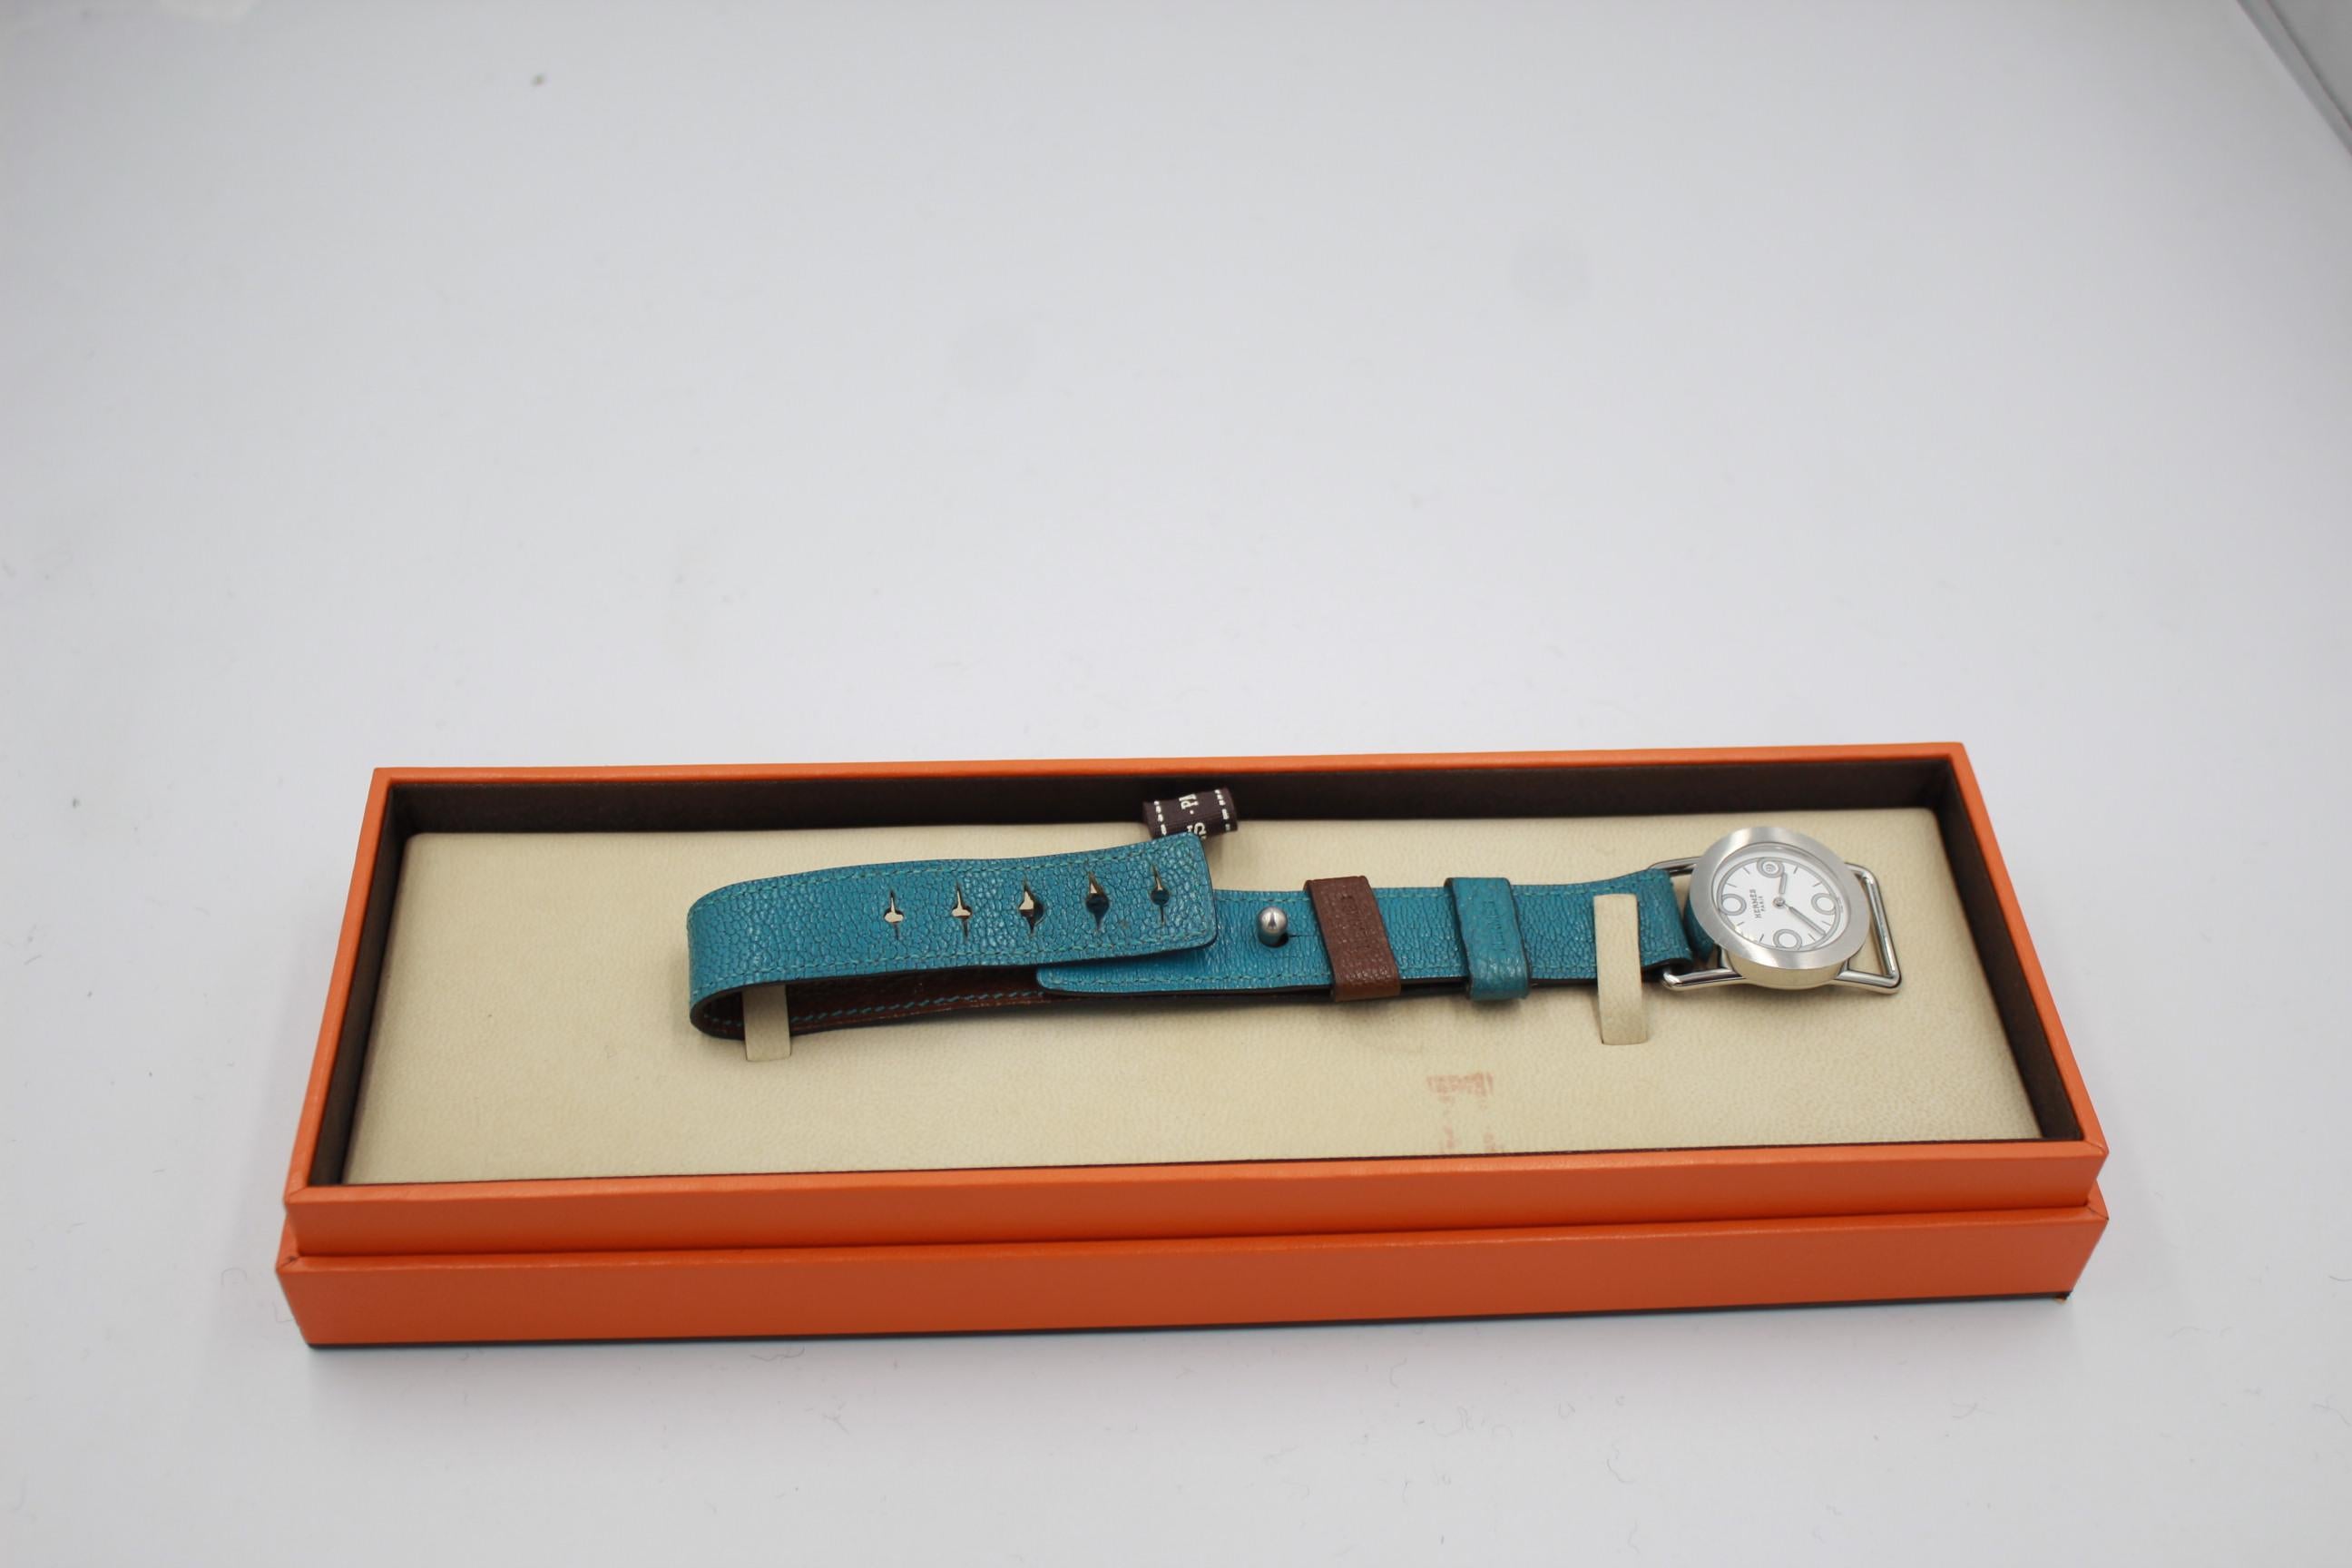 Hermès Barenia ronde watch with a leather strap, one side blue and one side chocolate coloured. The bracelet is adjustable and can be worn in different sizes. 
Good condition, some signs of wear on the leather strap.
Sold in its original box

